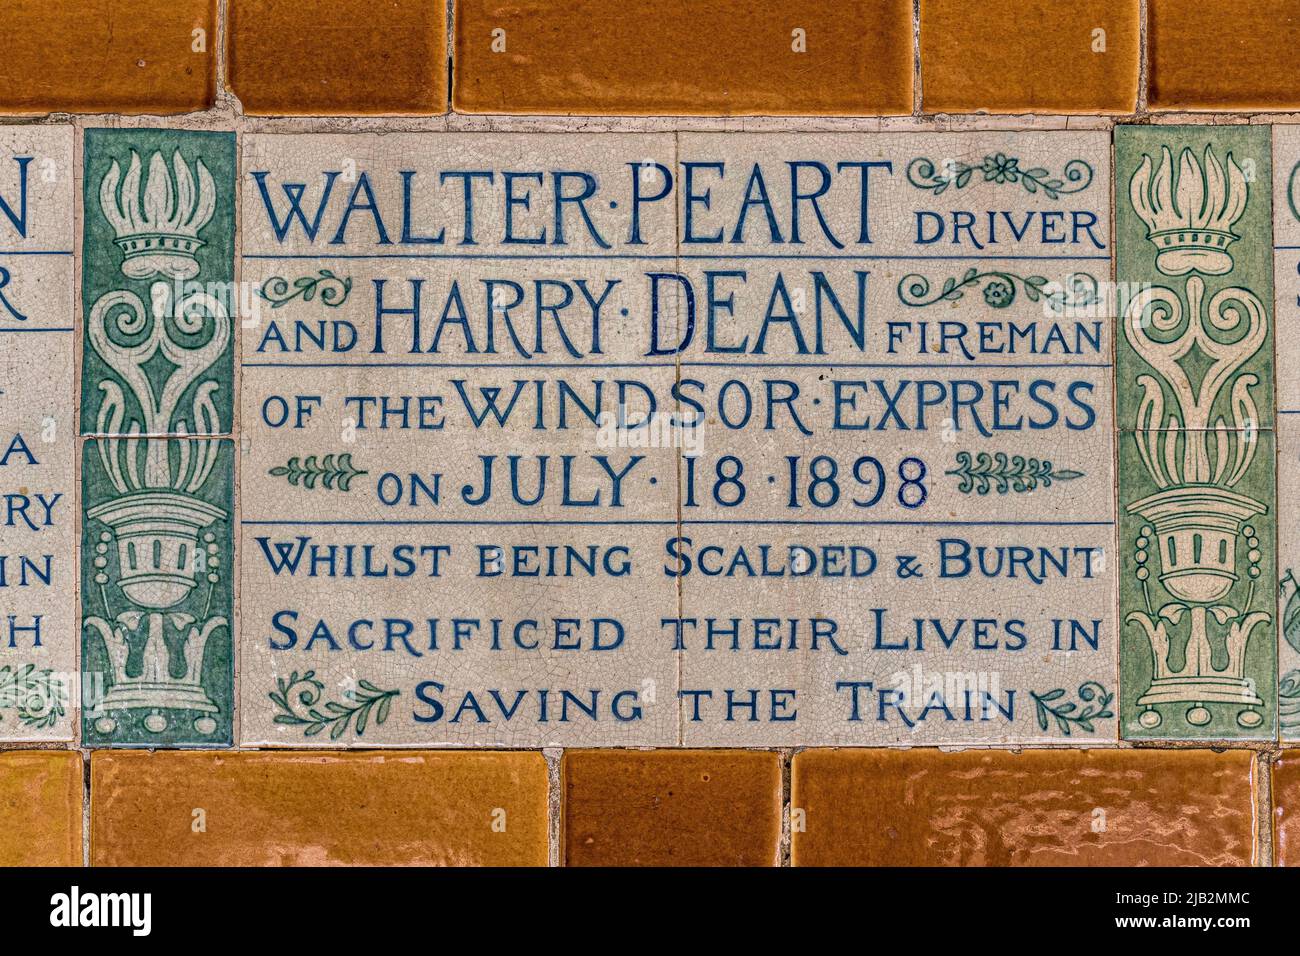 A ceramic memorial tablet dedicated to Walter Peart on the wall at The Watts Memorial to Heroic Self-Sacrifice in Postman’s Park,  London, EC1 Stock Photo